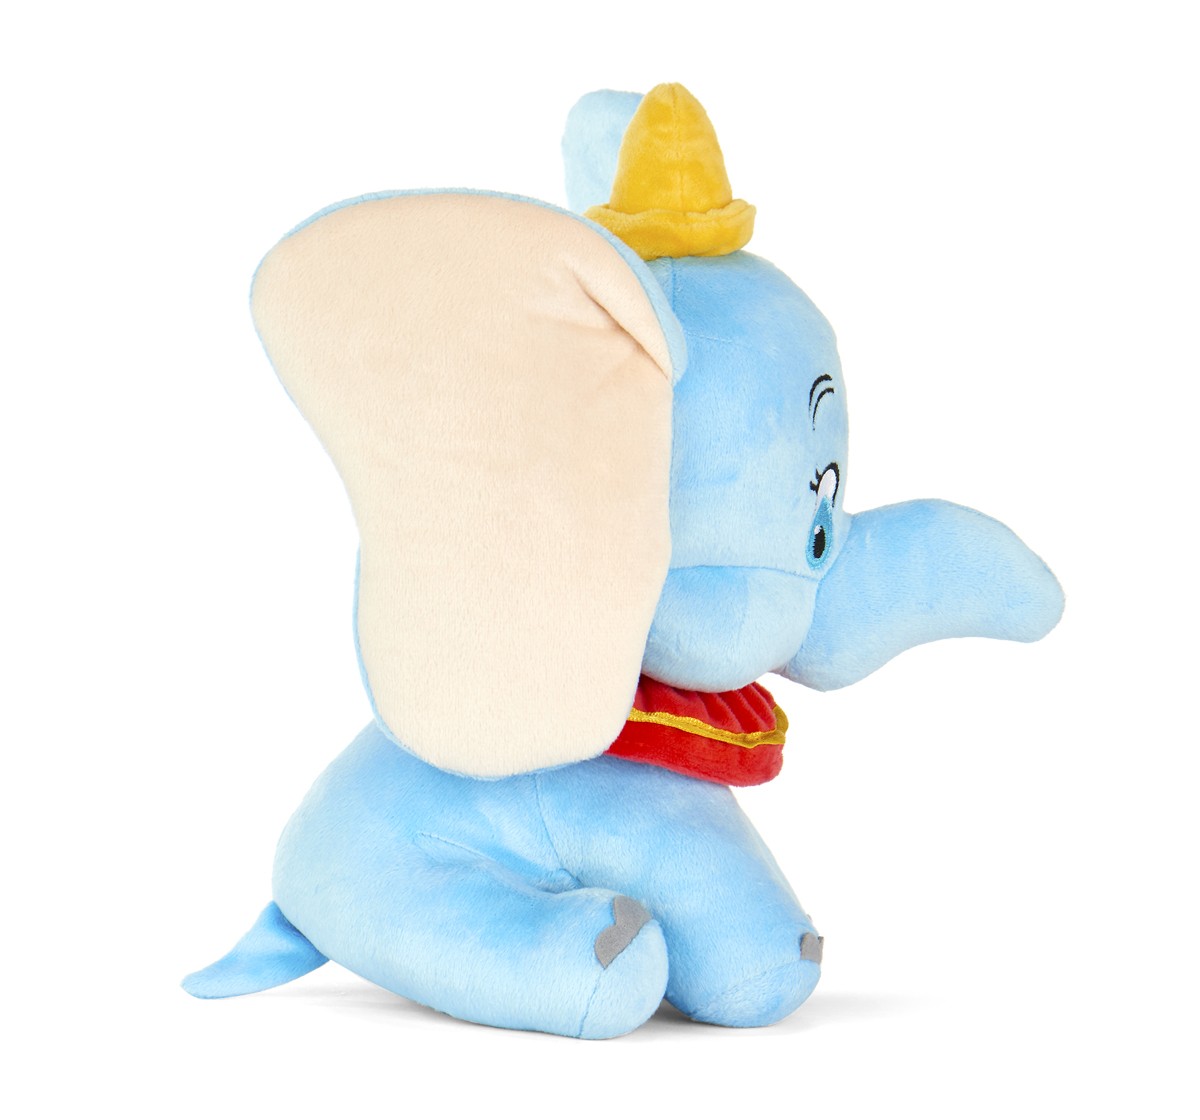 Disney Classic Dumbo 9 Inch Soft Toy for Kids, Multicolor 2Y+